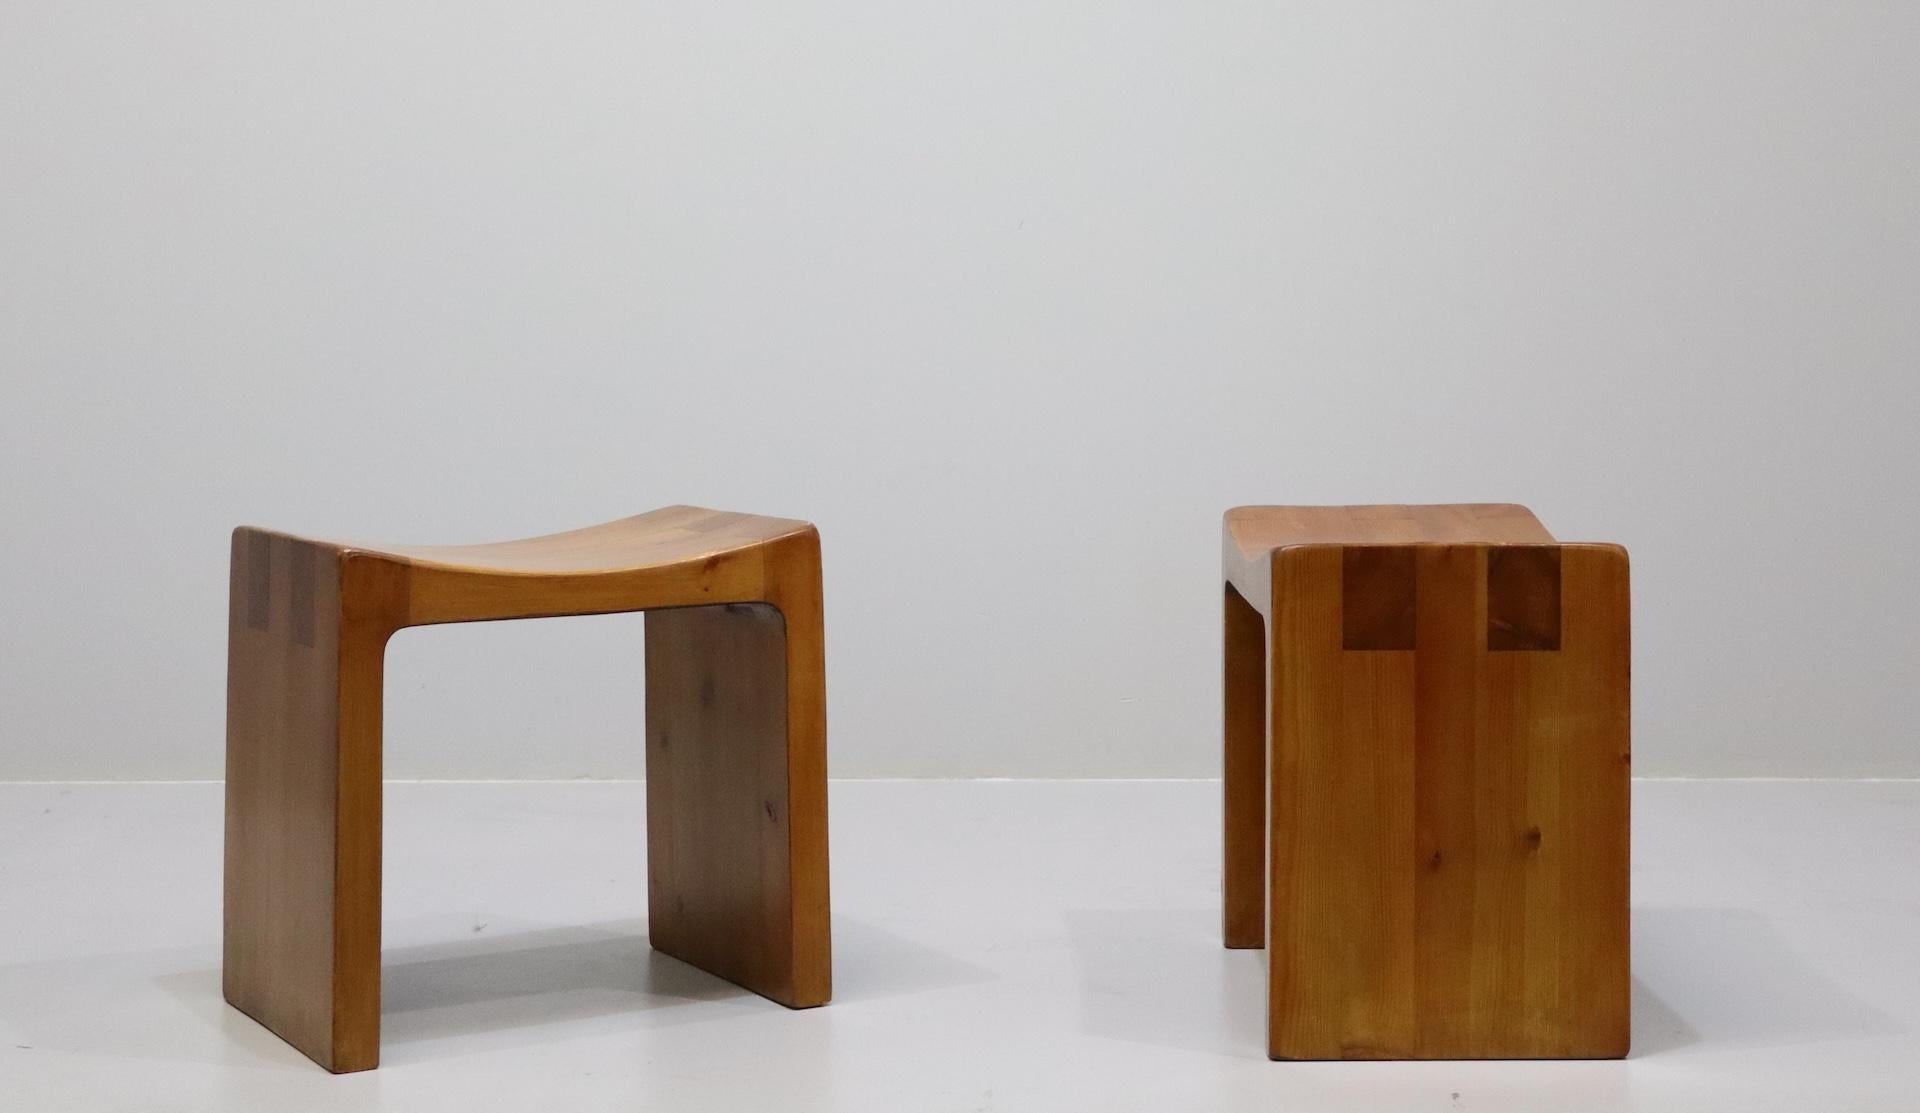 Rare pair of Italian stools by Giuseppe Rivadossi from the 1970s. The stools are made entirely of wood. Its construction is a perfect interlocking of noble wood inserts. Great mastery in woodworking.